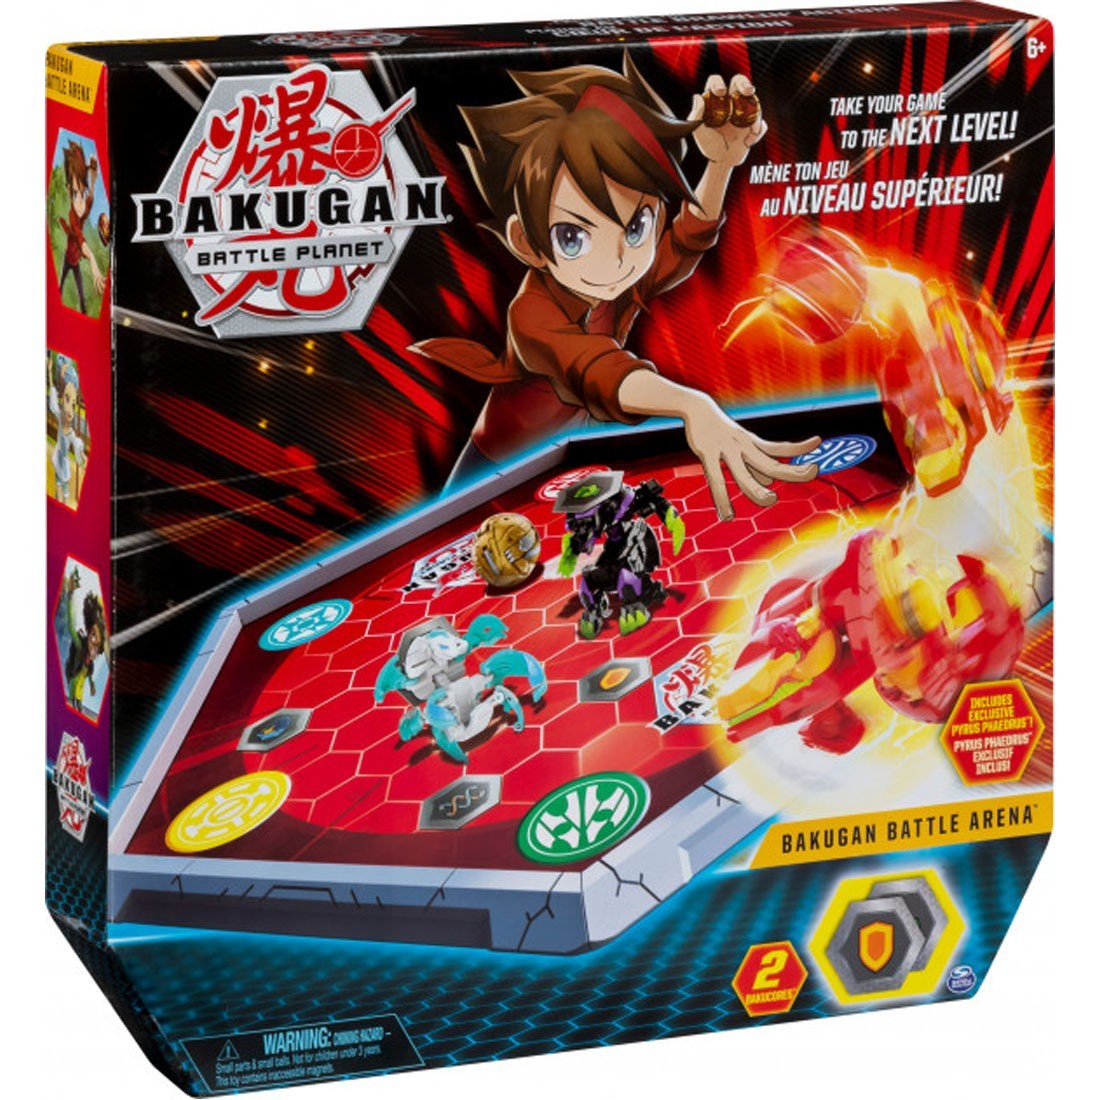 Order Spin Master Bakugan Battle planet game set Battle Arena and Bakugan -  Bakugan, delivered to your home | The Outfit